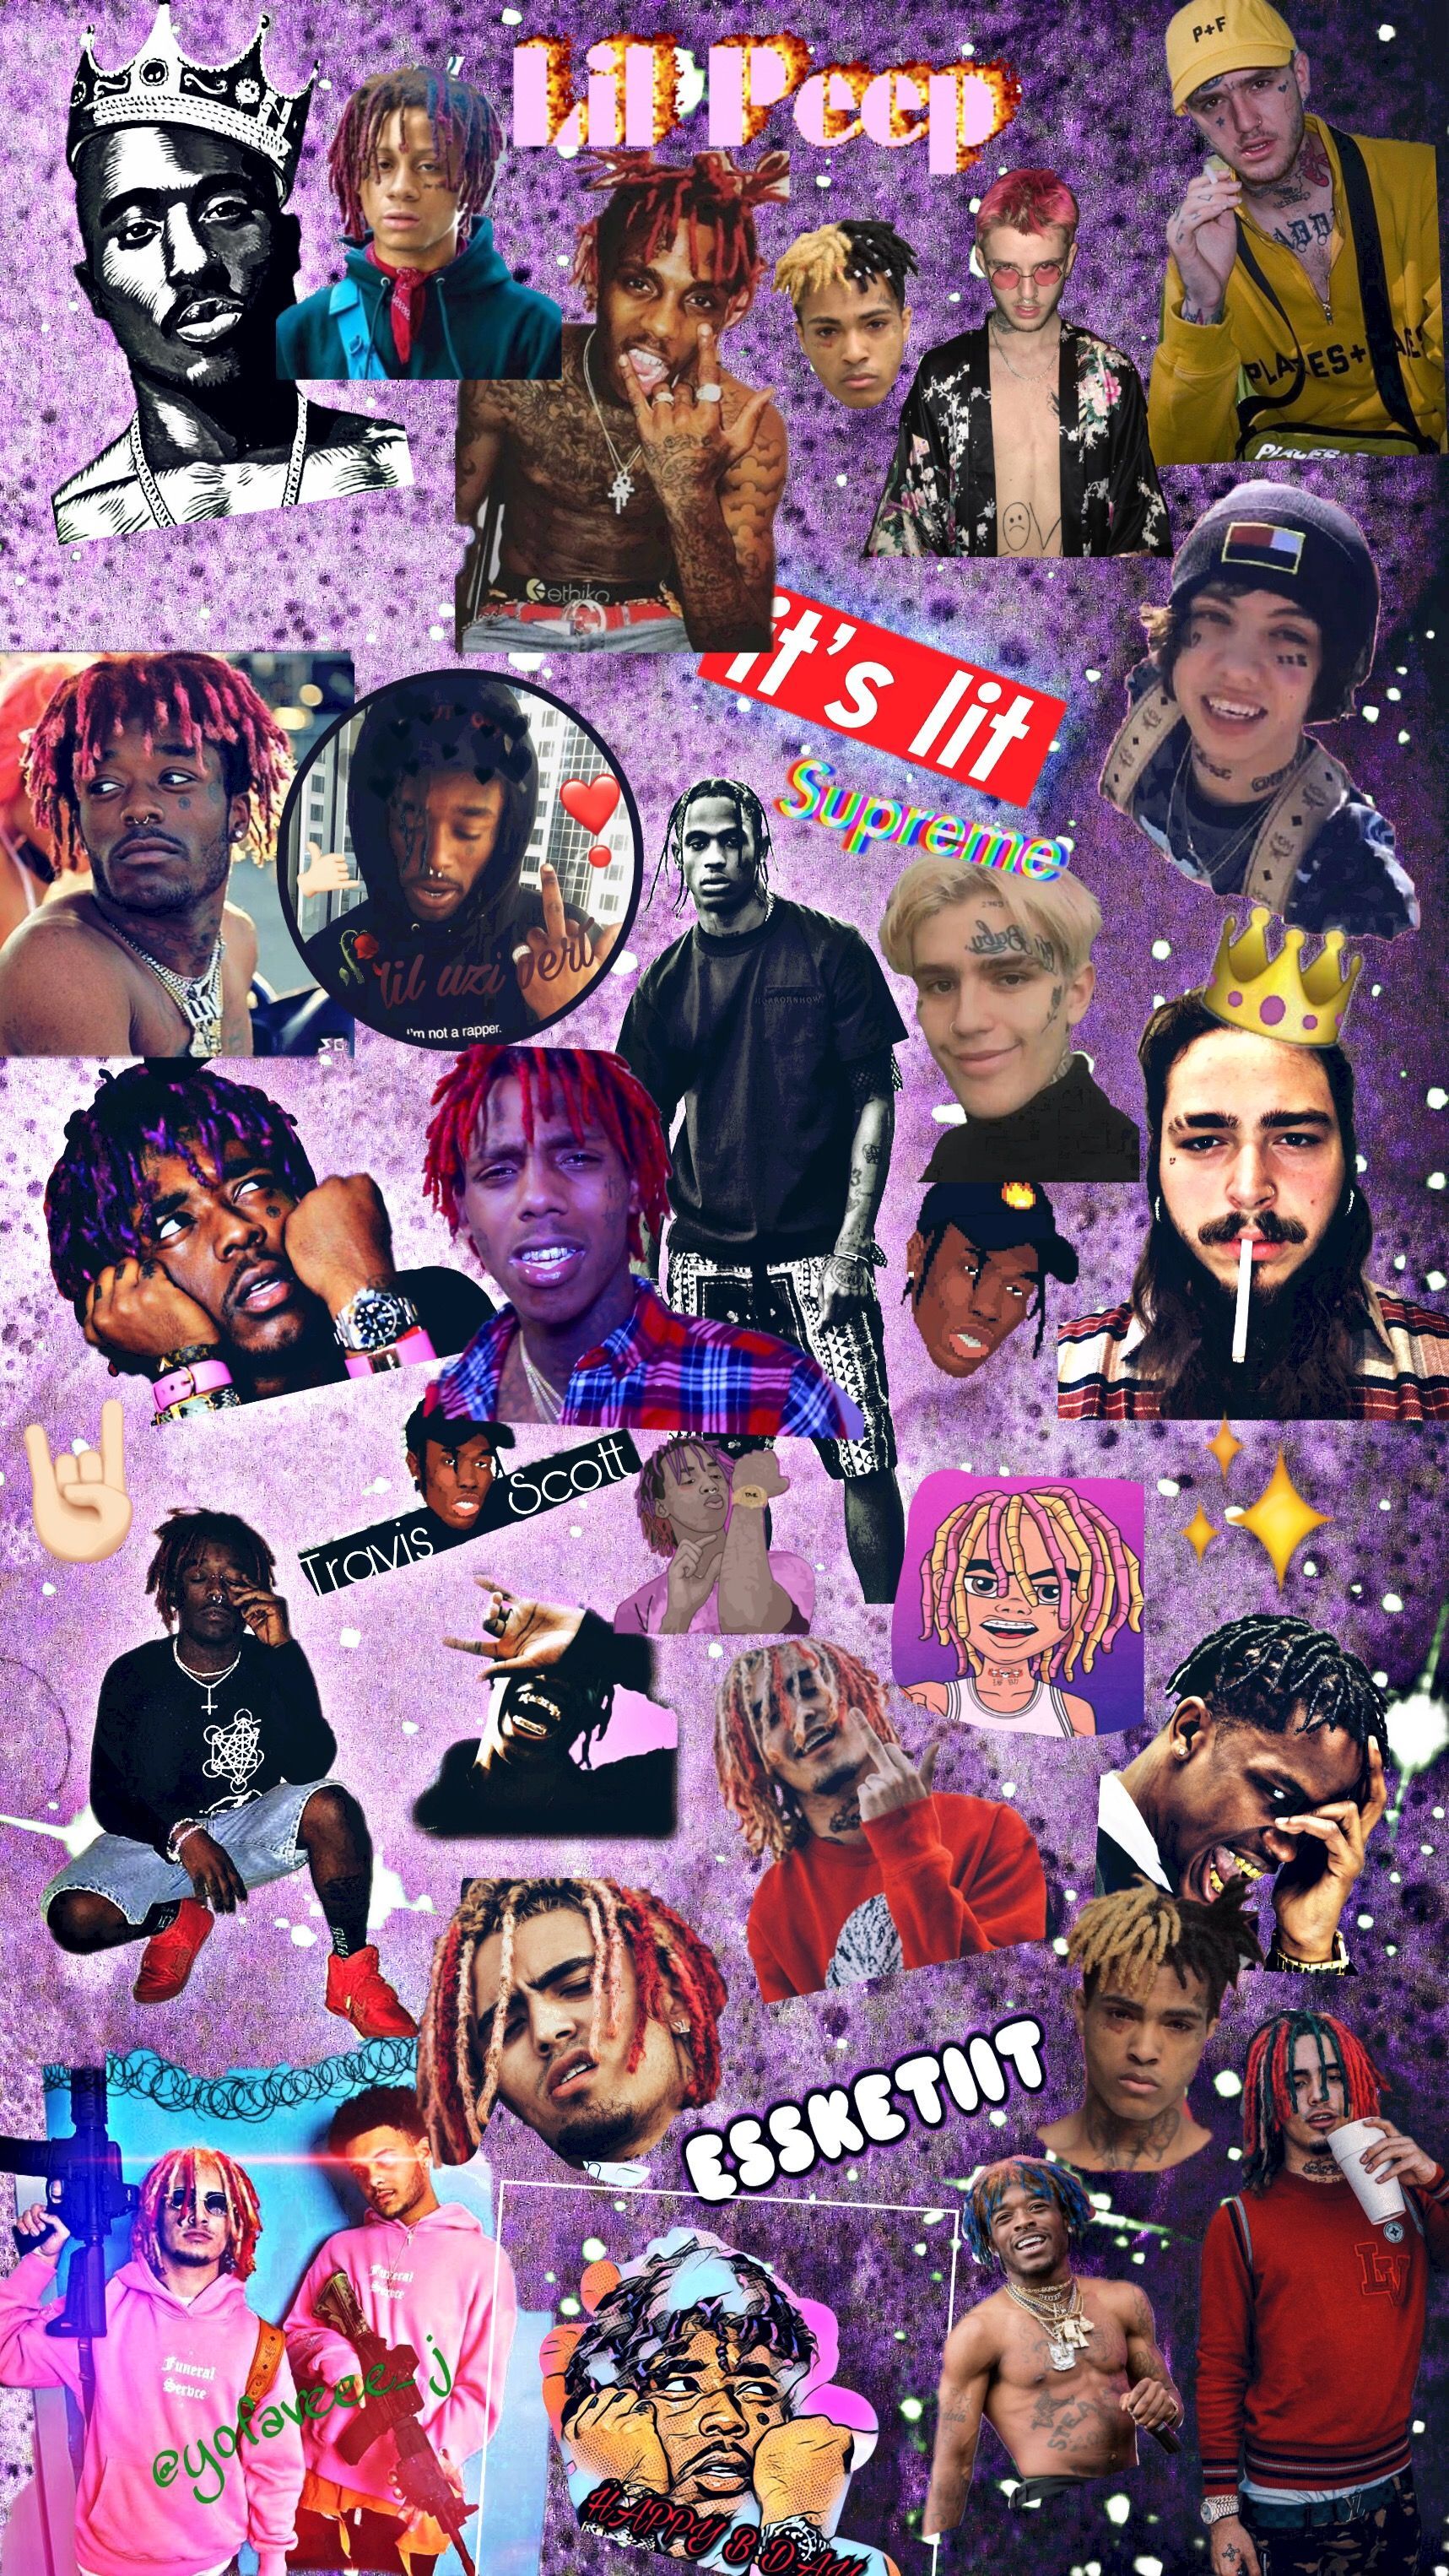 Lil Peep Wallpaper I Made For My Phone - Chance the Rapper